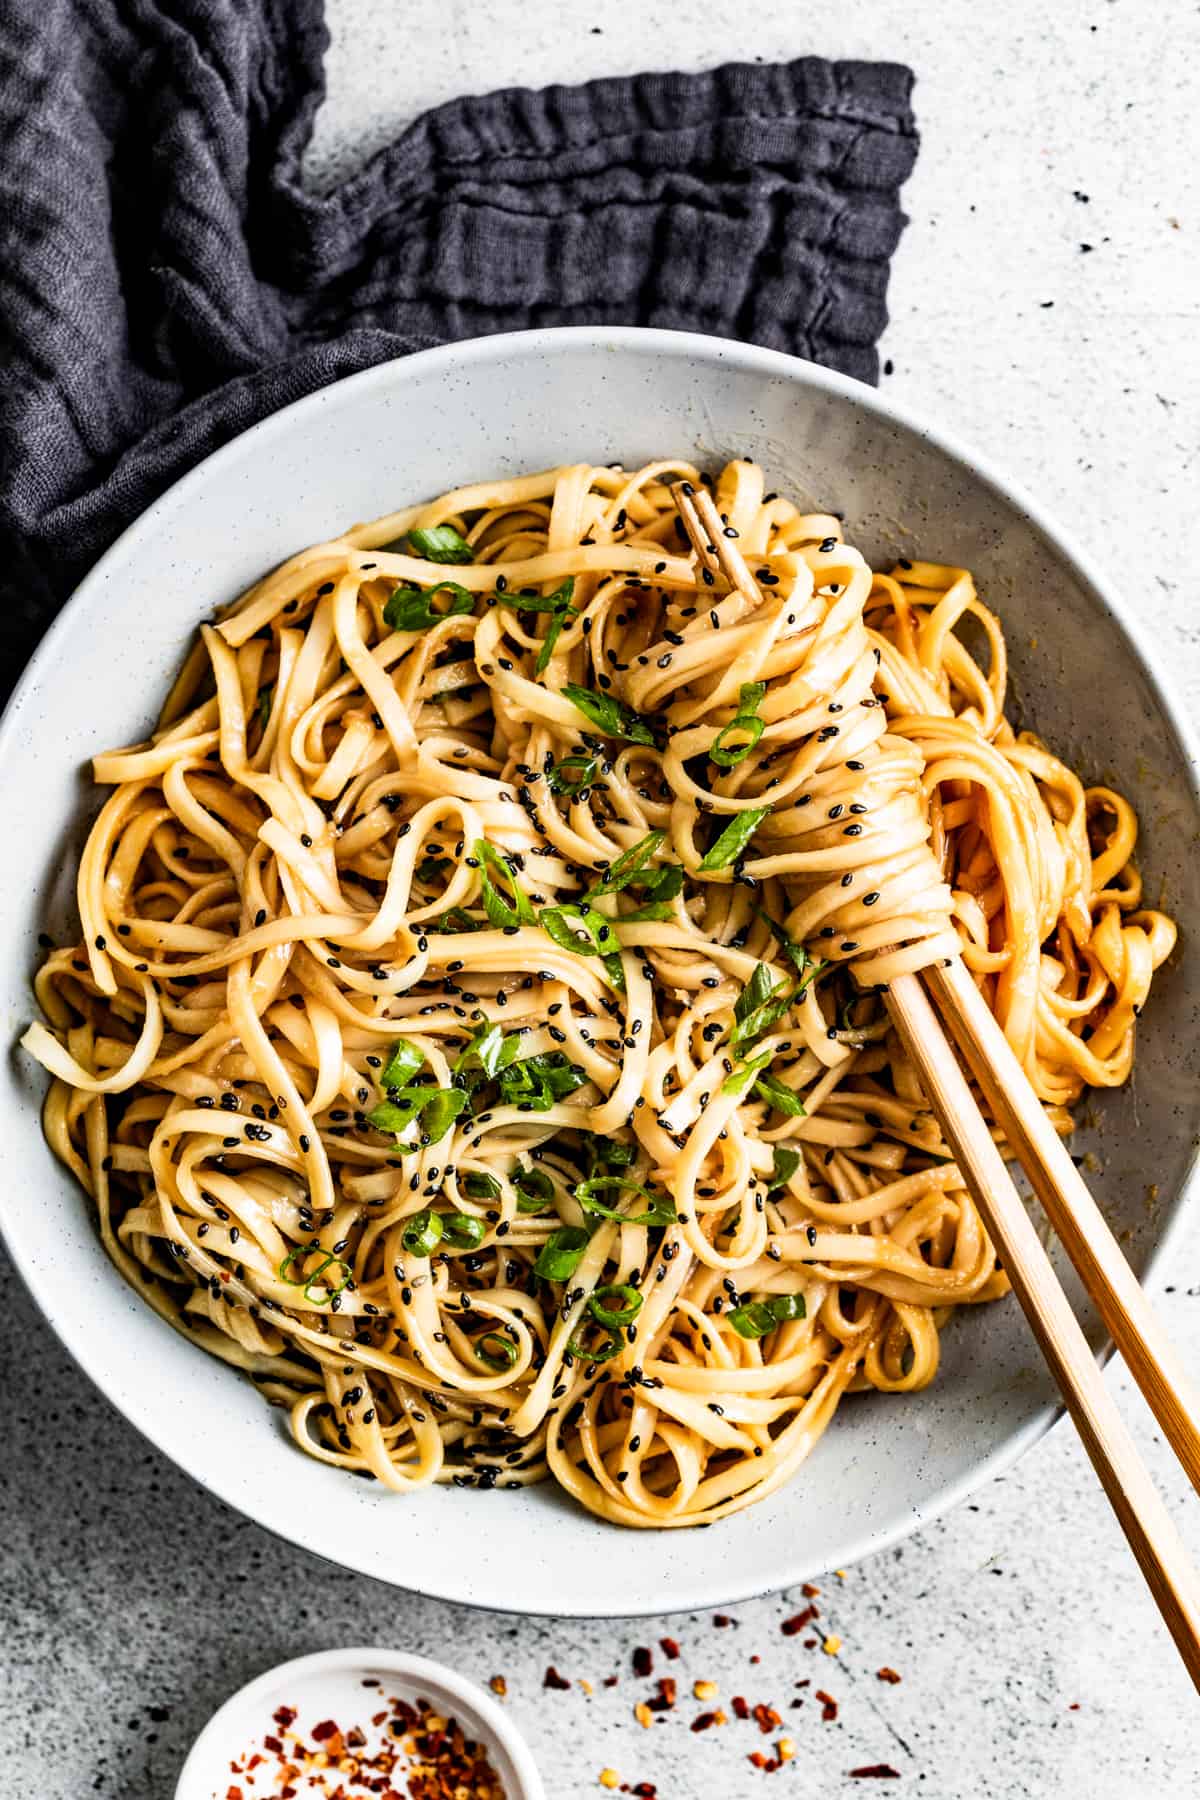 Easy teriyaki noodles in a bowl sprinkled with green onions and sesame seeds.